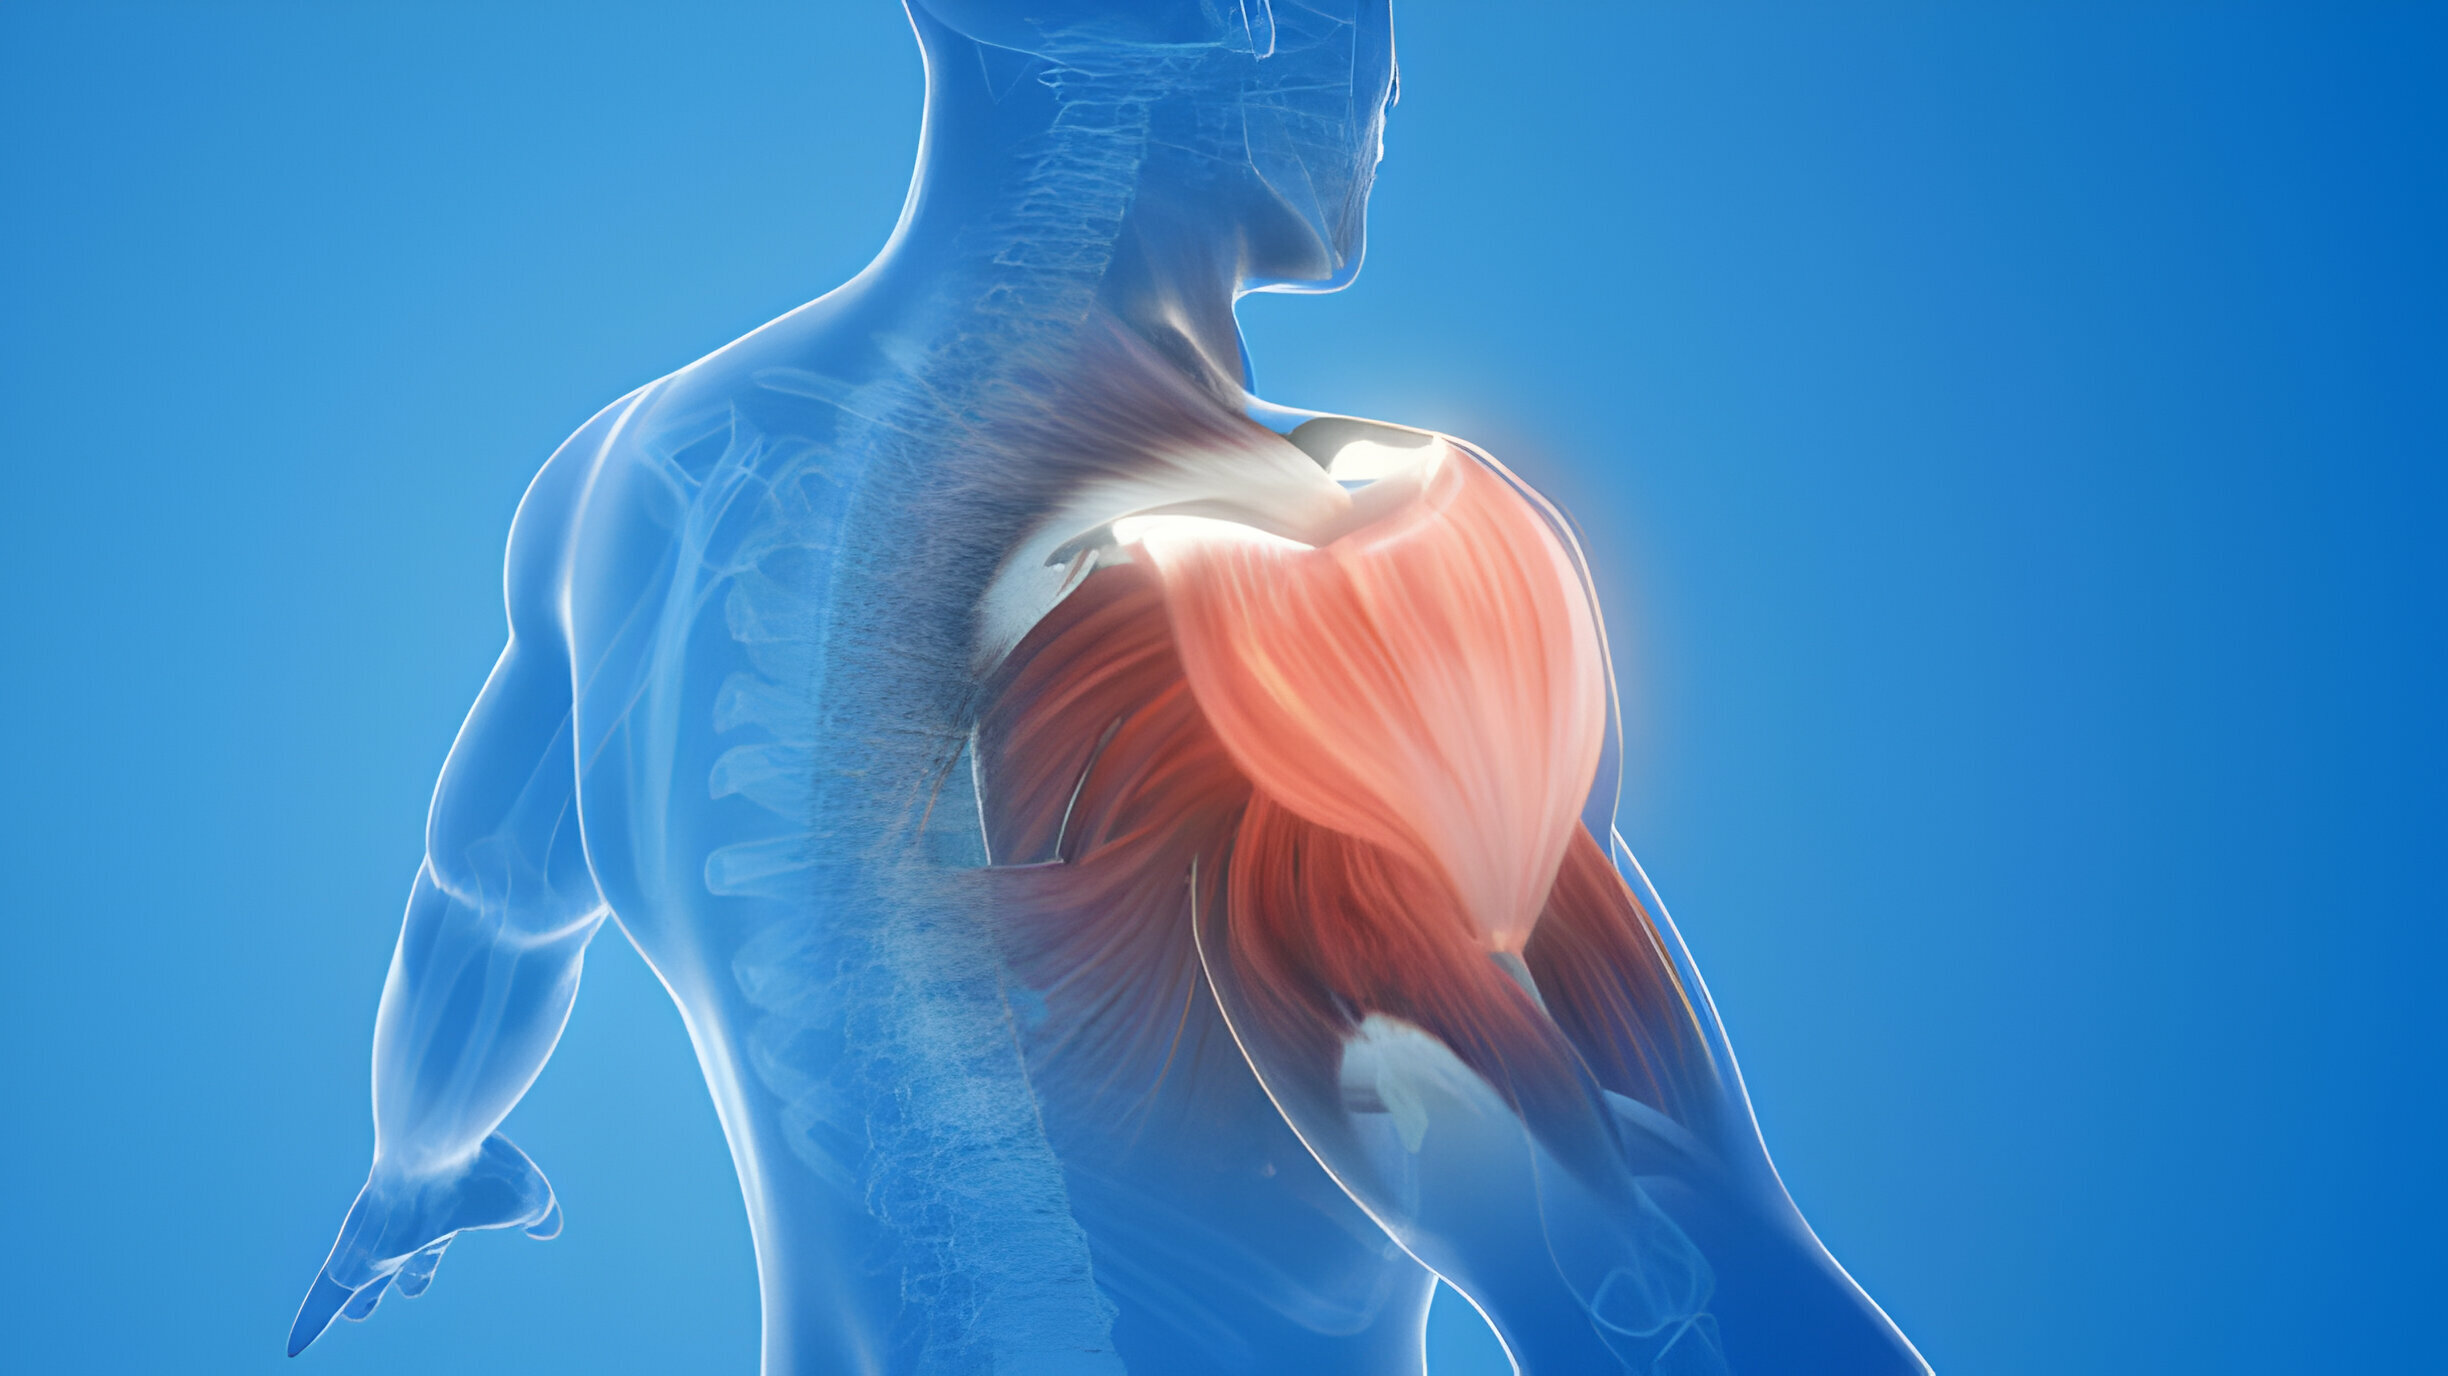 Causes and Treatment of Post-Stroke Shoulder